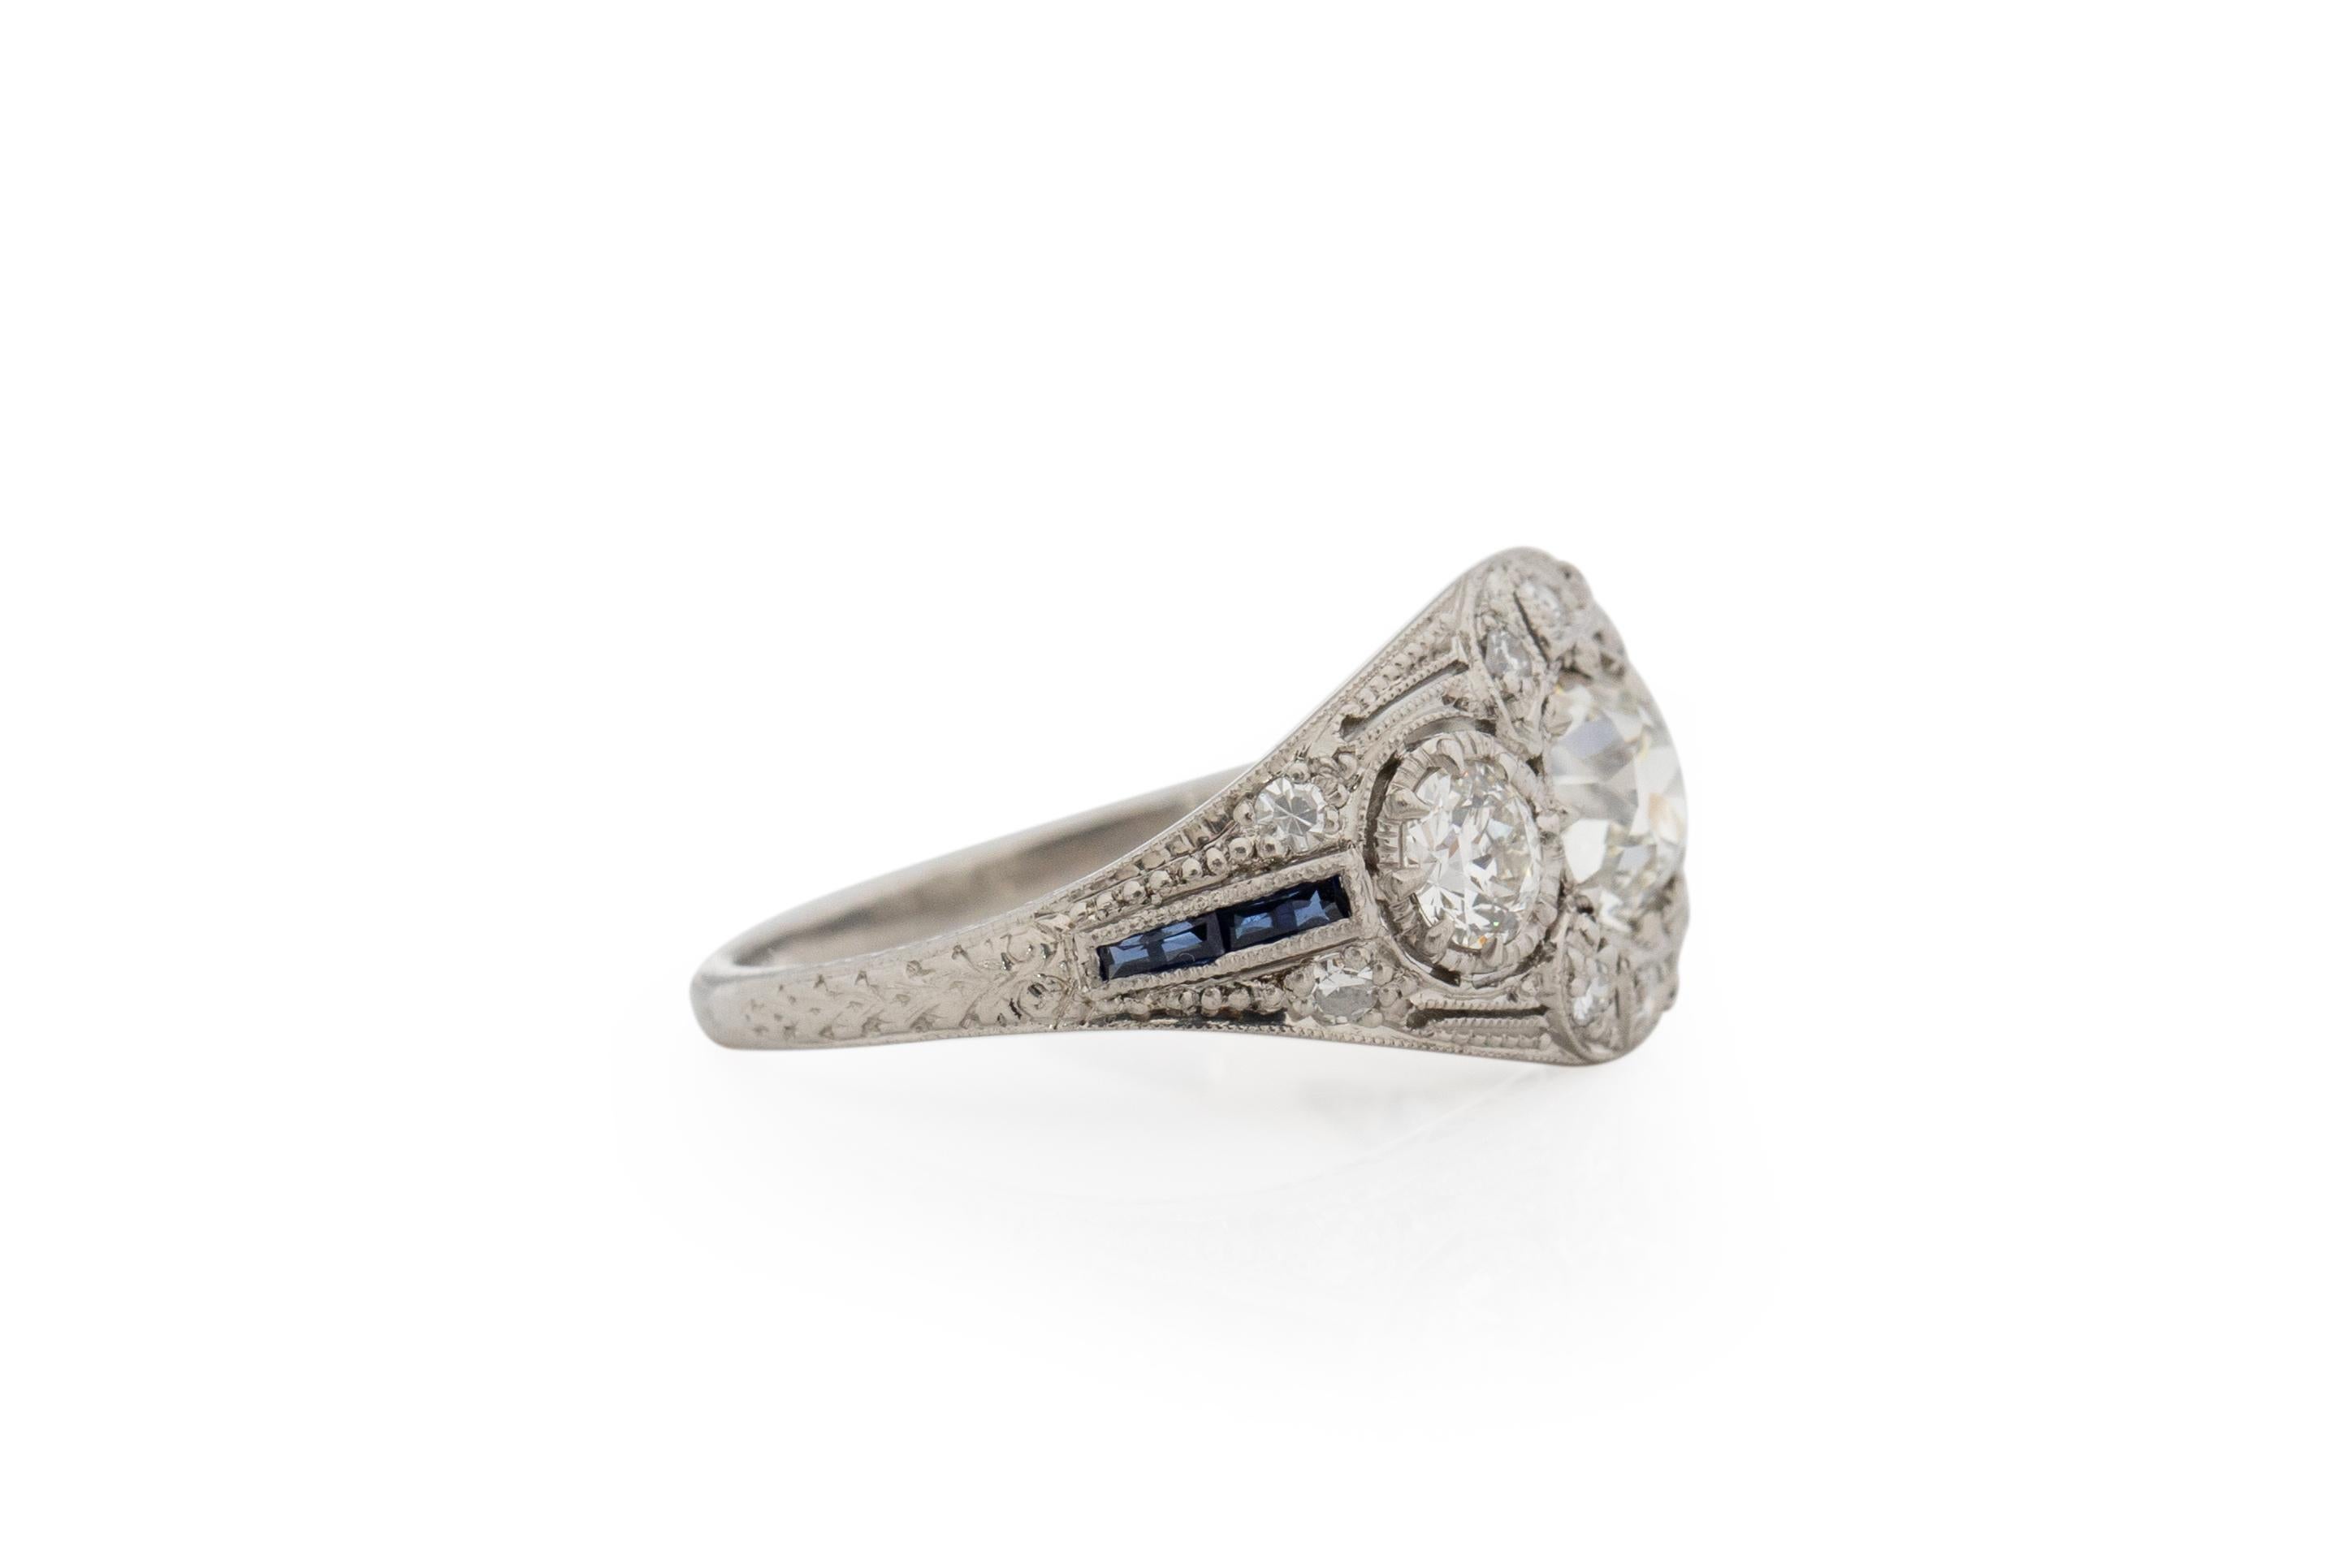 Ring Size: 6
Metal Type: Platinum [Hallmarked, and Tested]
Weight: .0 grams

Center Diamond Details:
Weight: .71 carat
Cut: Old European Brilliant
Color: I-J
Clarity: VS

Side Stone Details:
Weight: .65 carat total weight
Cut: Old European